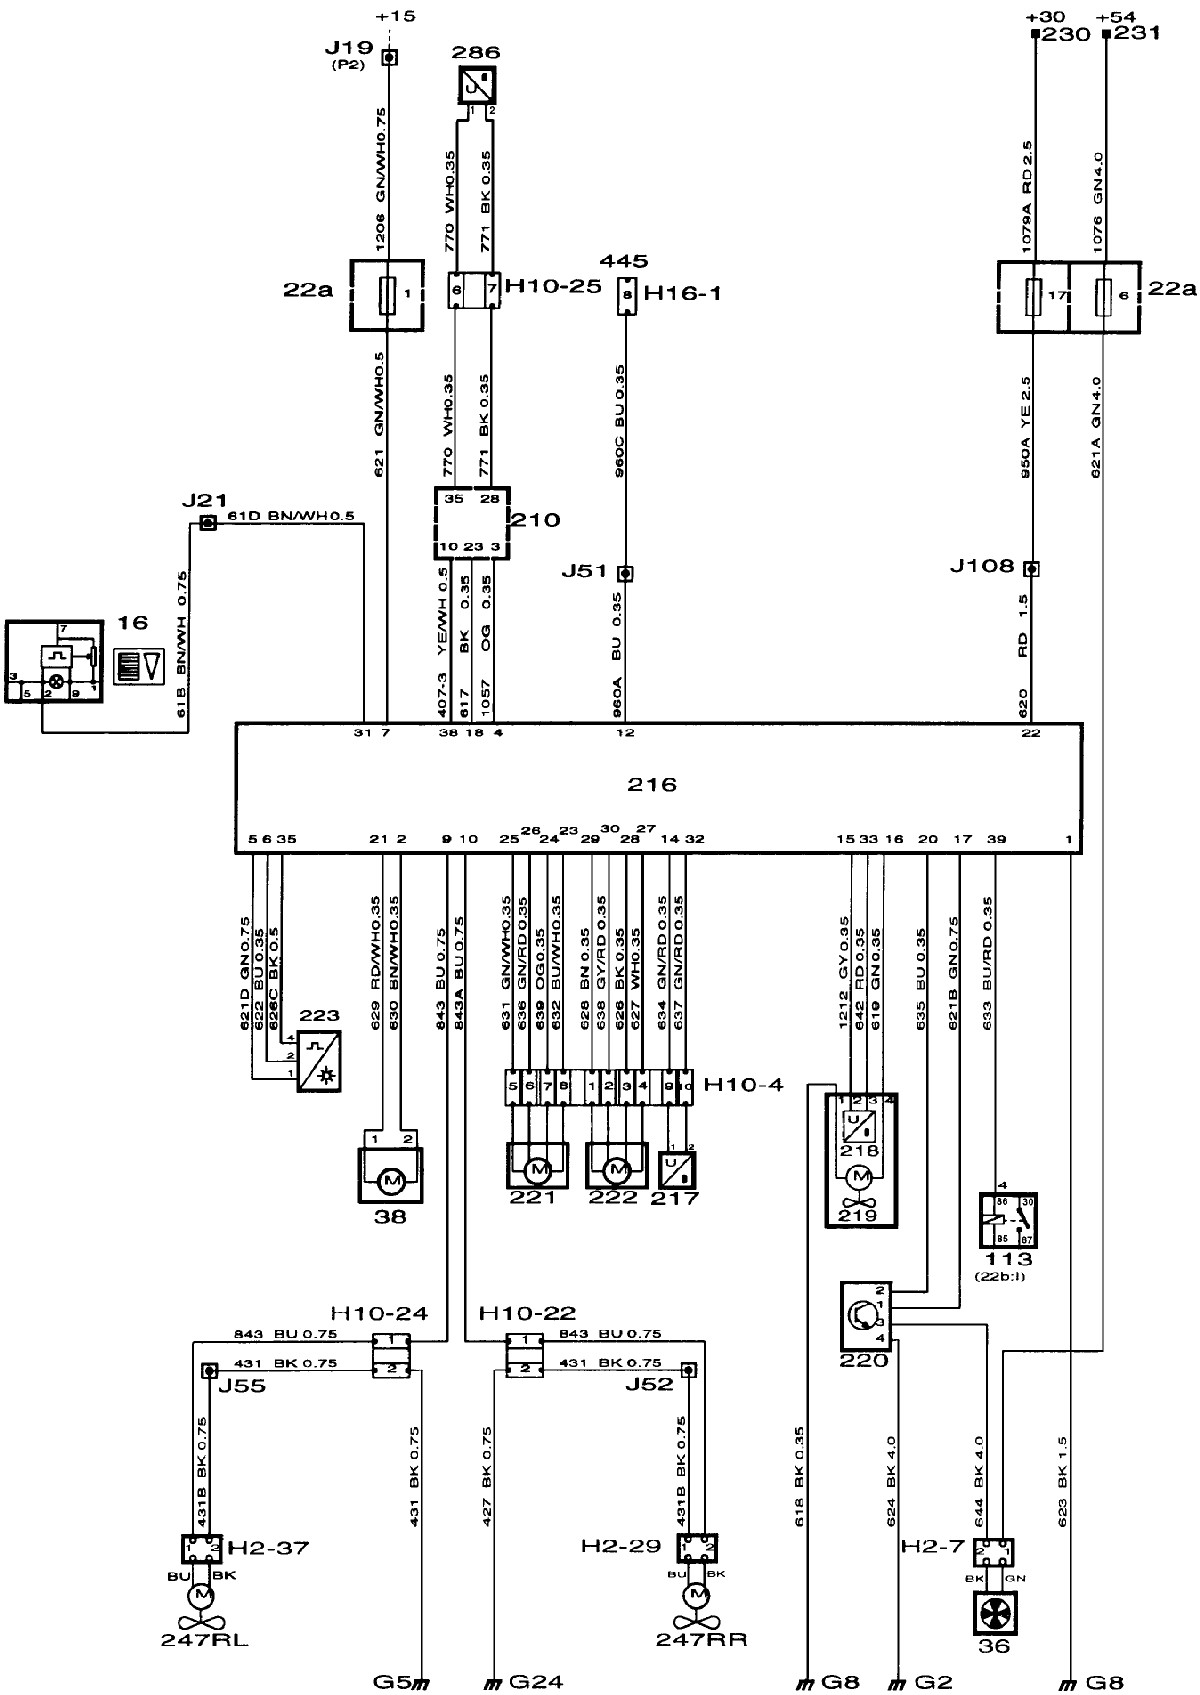 3 Wire Switch Diagram Diagram Bad Connection Starter Motor Rover 75 Wiring Diagram Of 3 Wire Switch Diagram